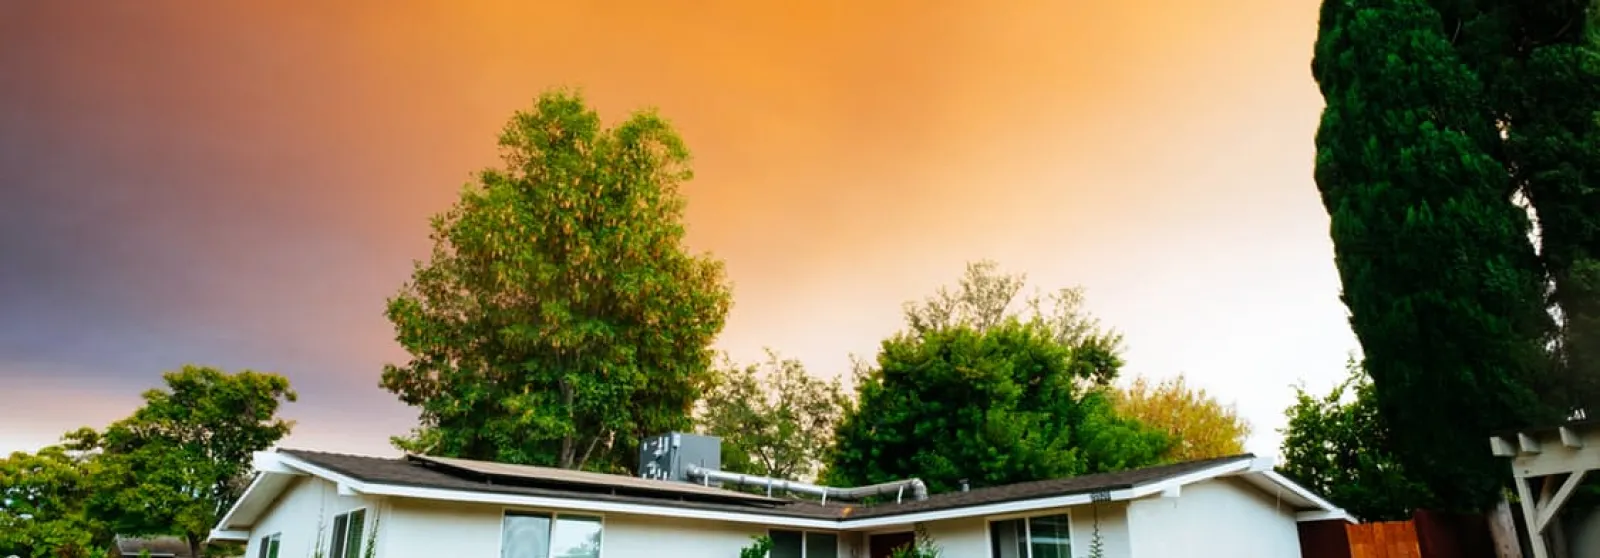 5 Things to Know When Preparing a Home Insurance Claim